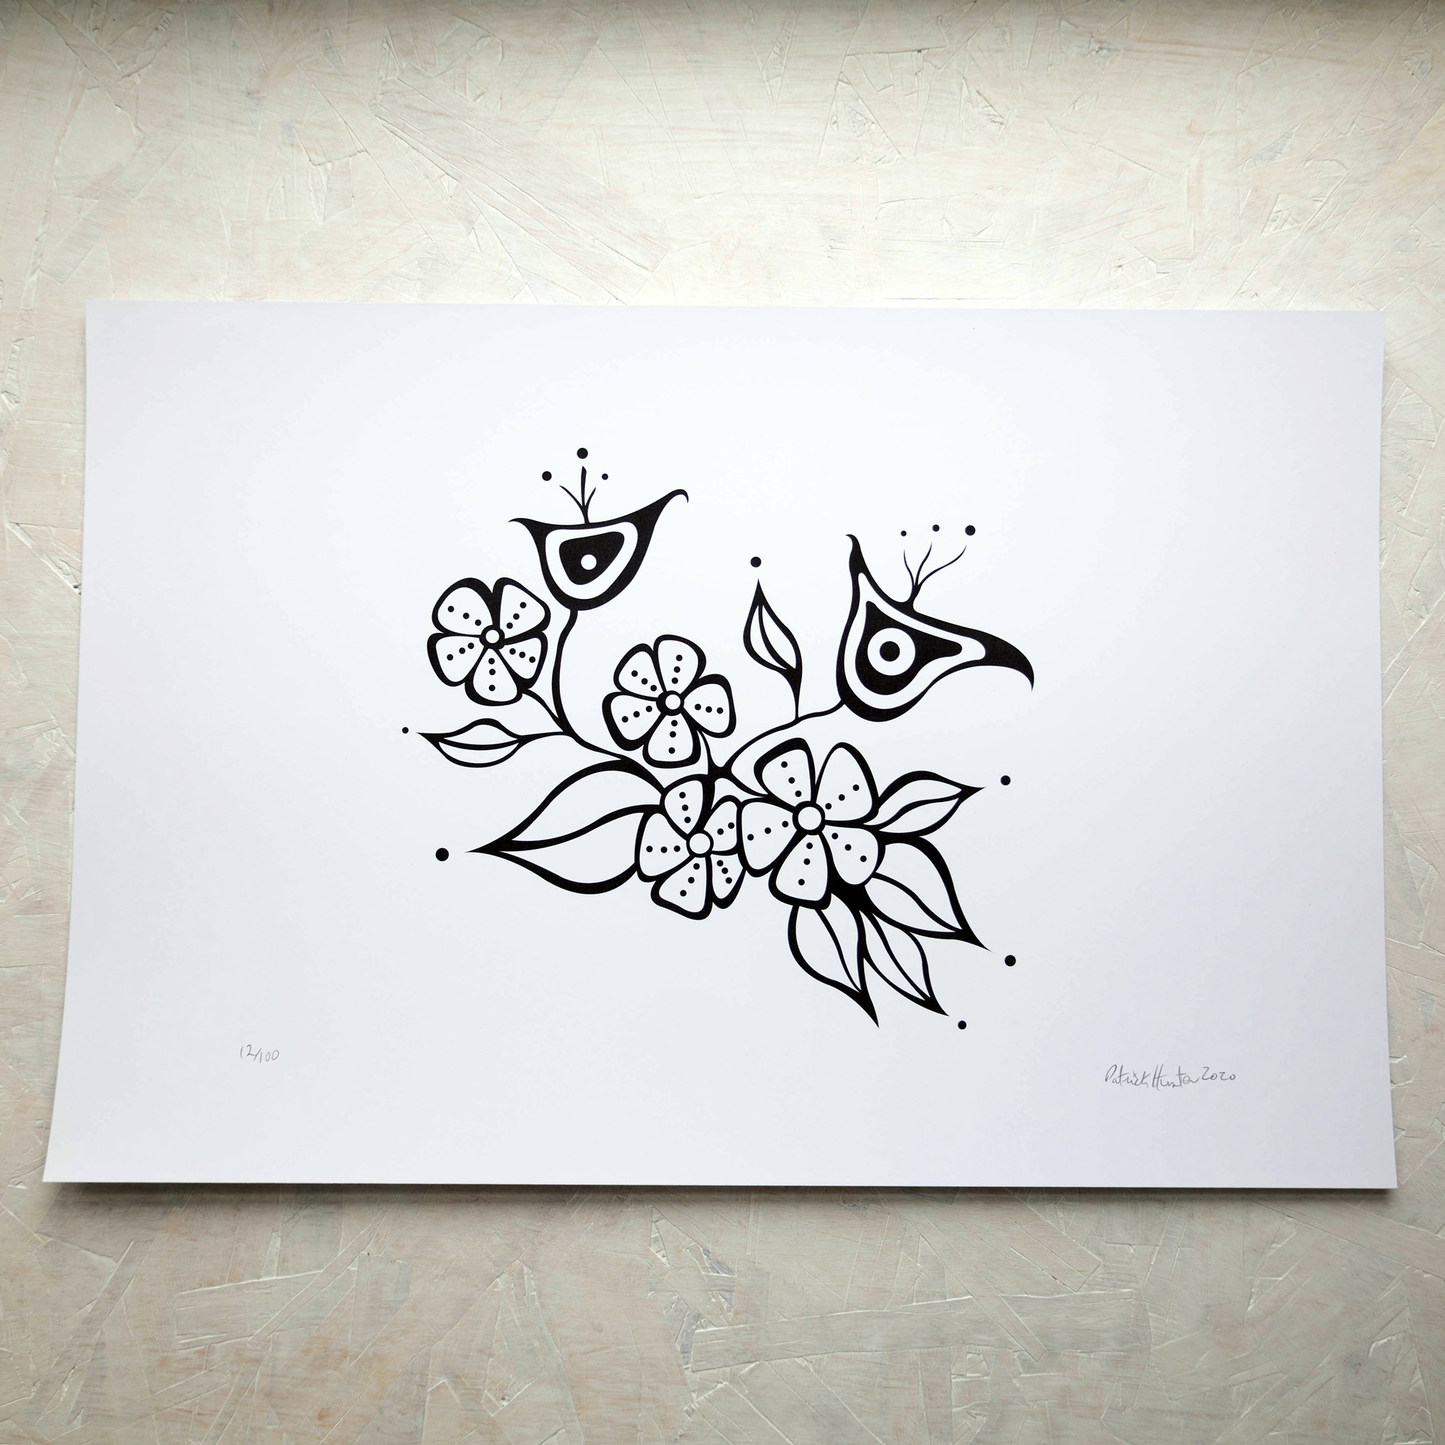 Print of Patrick Hunter's painting of flowers, black on white, woodland art style.